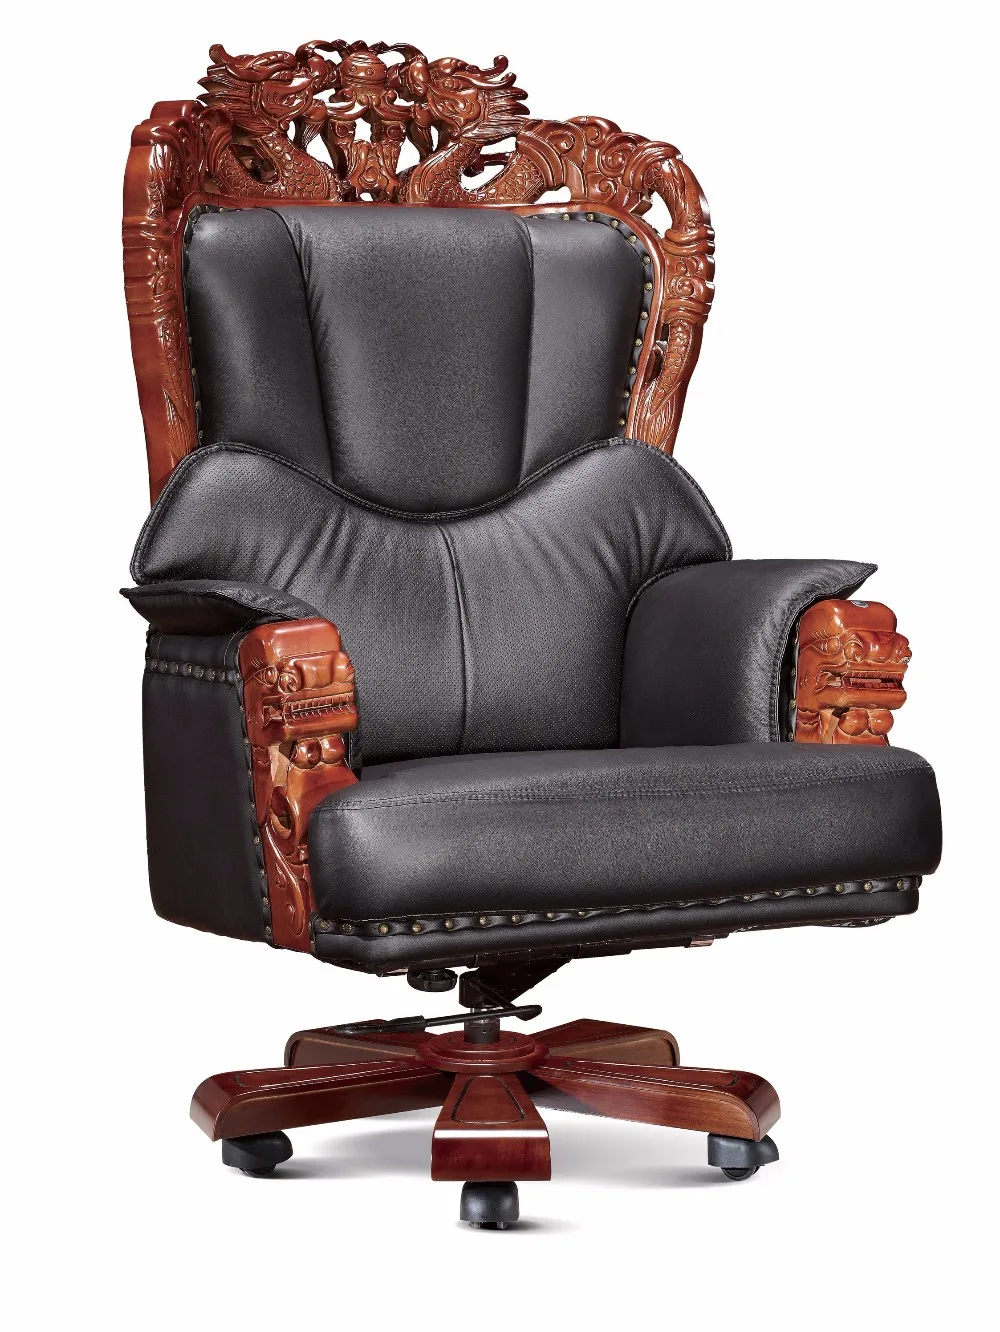 Deluxe Genuine Cowhide Furniture Swivel Executive Ceo Office Chair With Massage Function Buy Ceo Office Chair